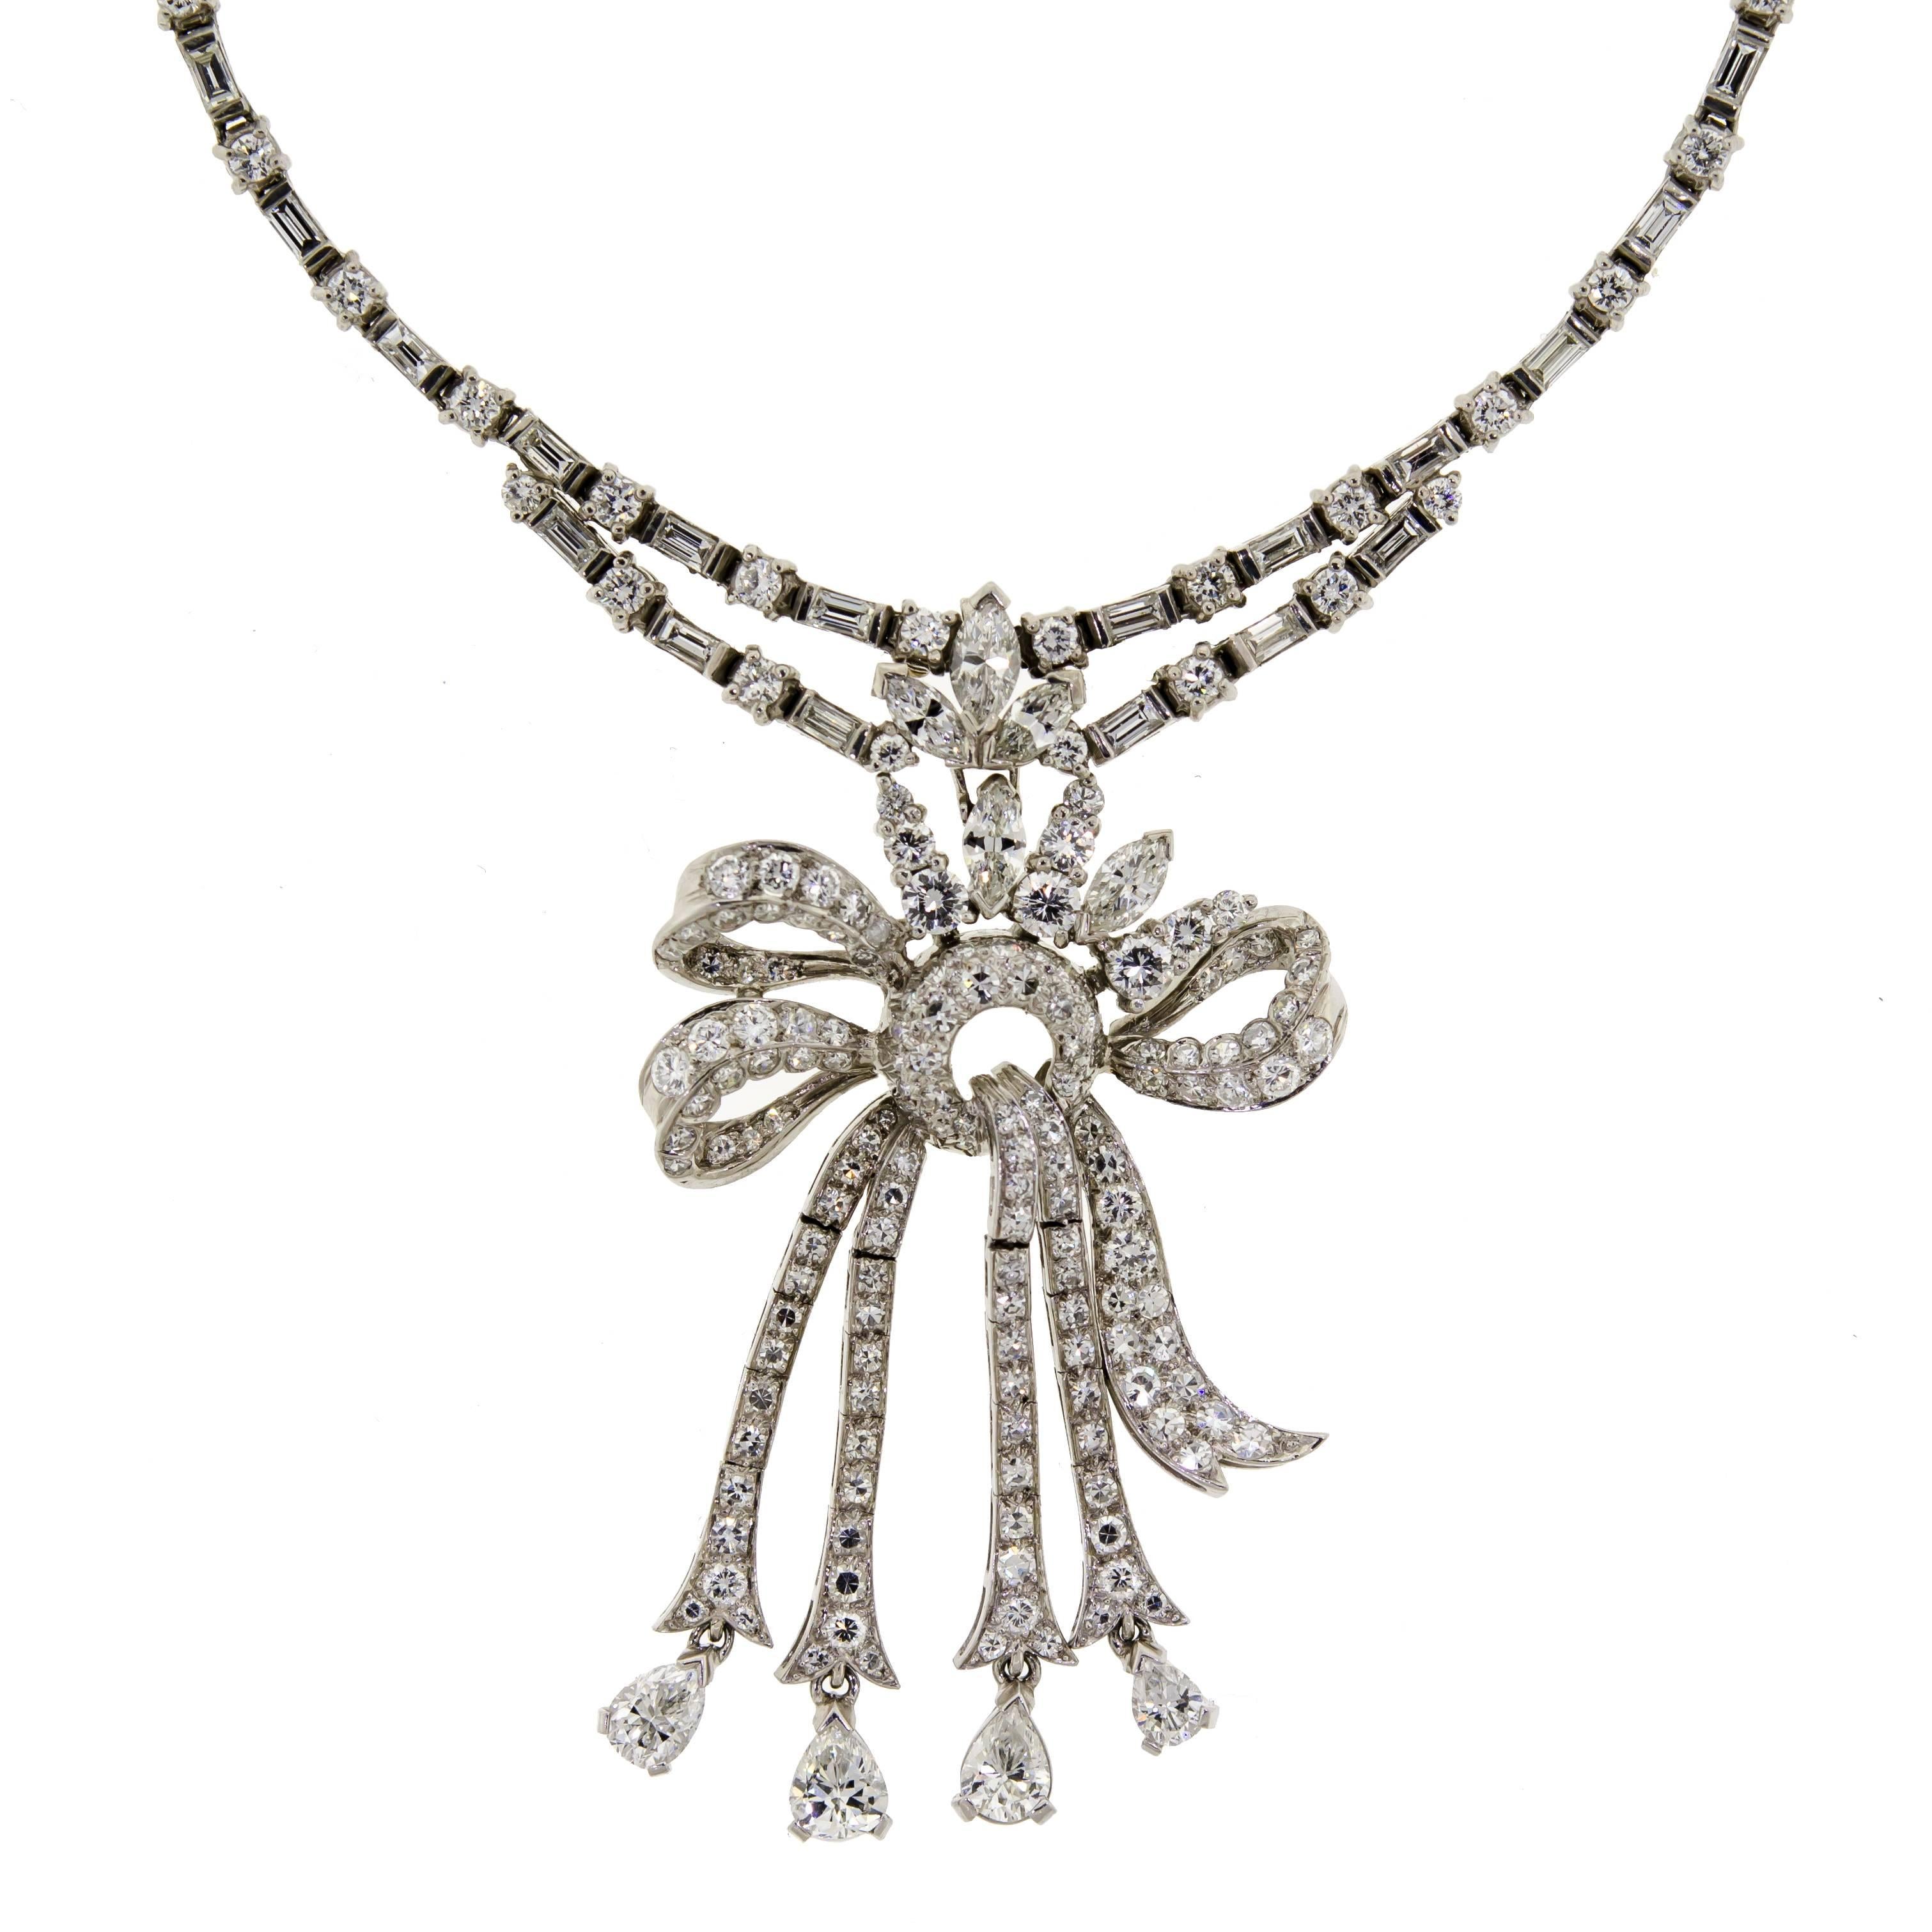 1950's diamond and platinum lady's riviere necklace with detachable pendant. The necklace has a 